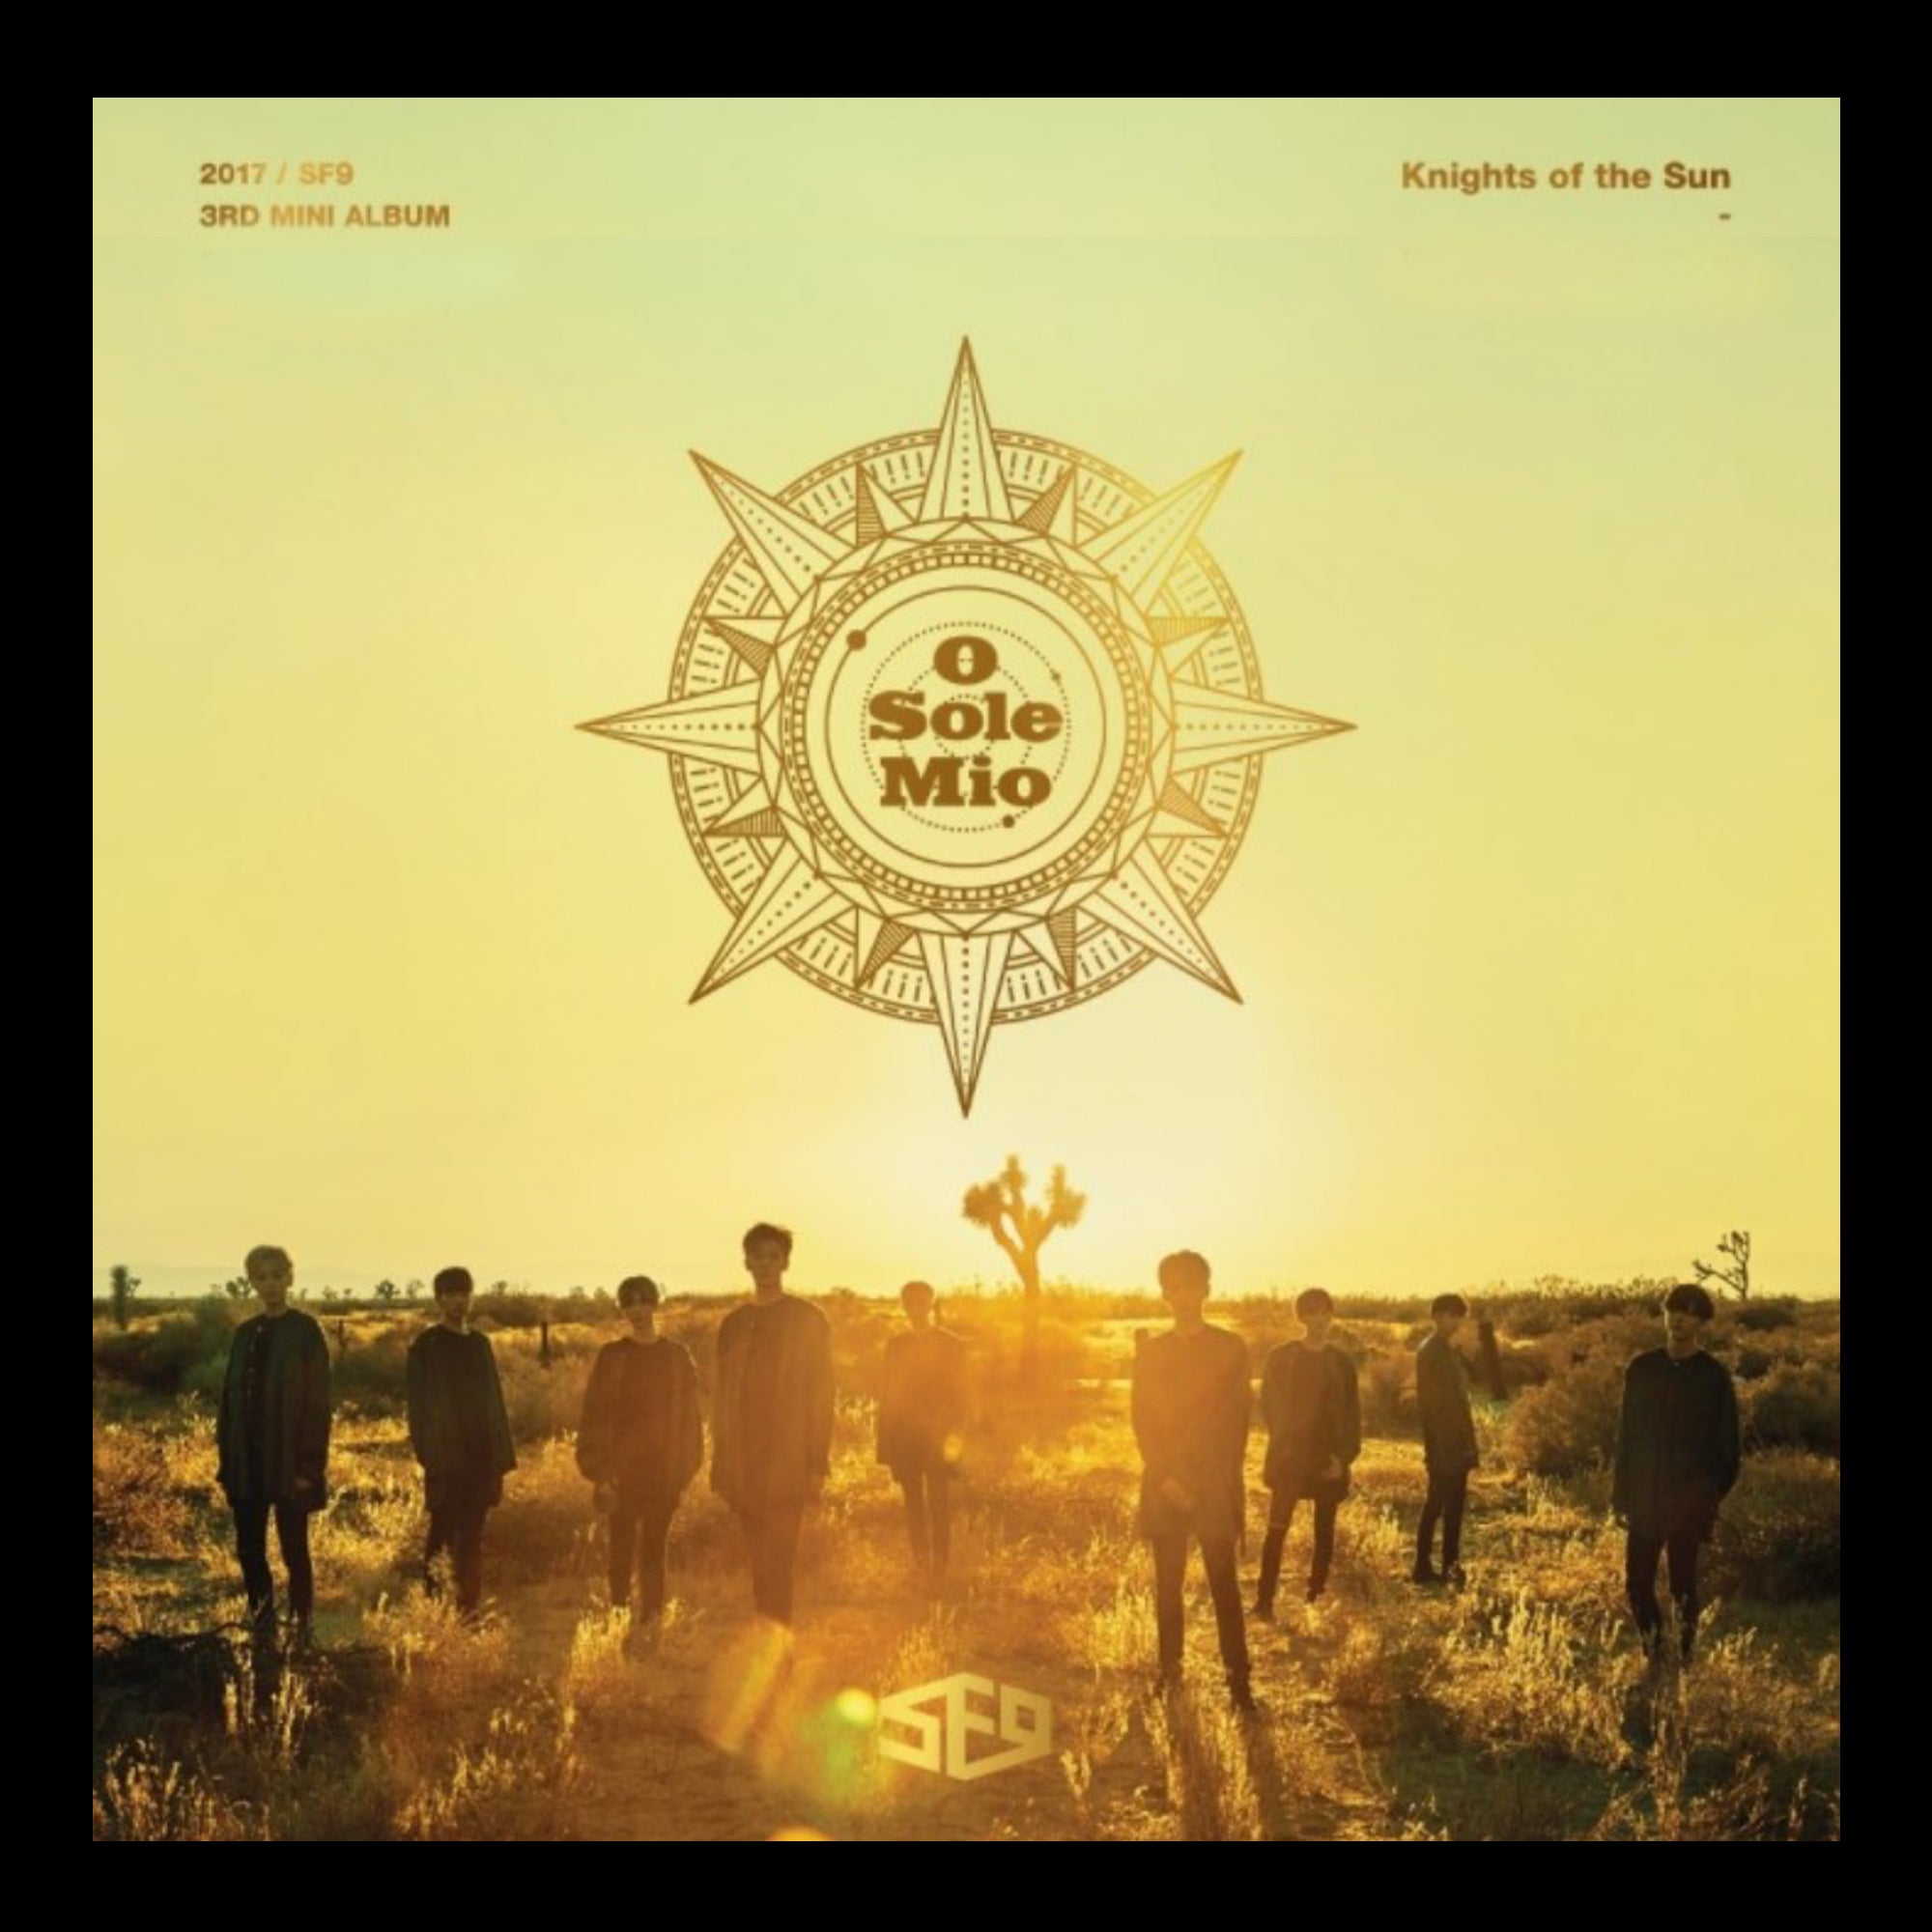 SF9 - Knights of the Sun